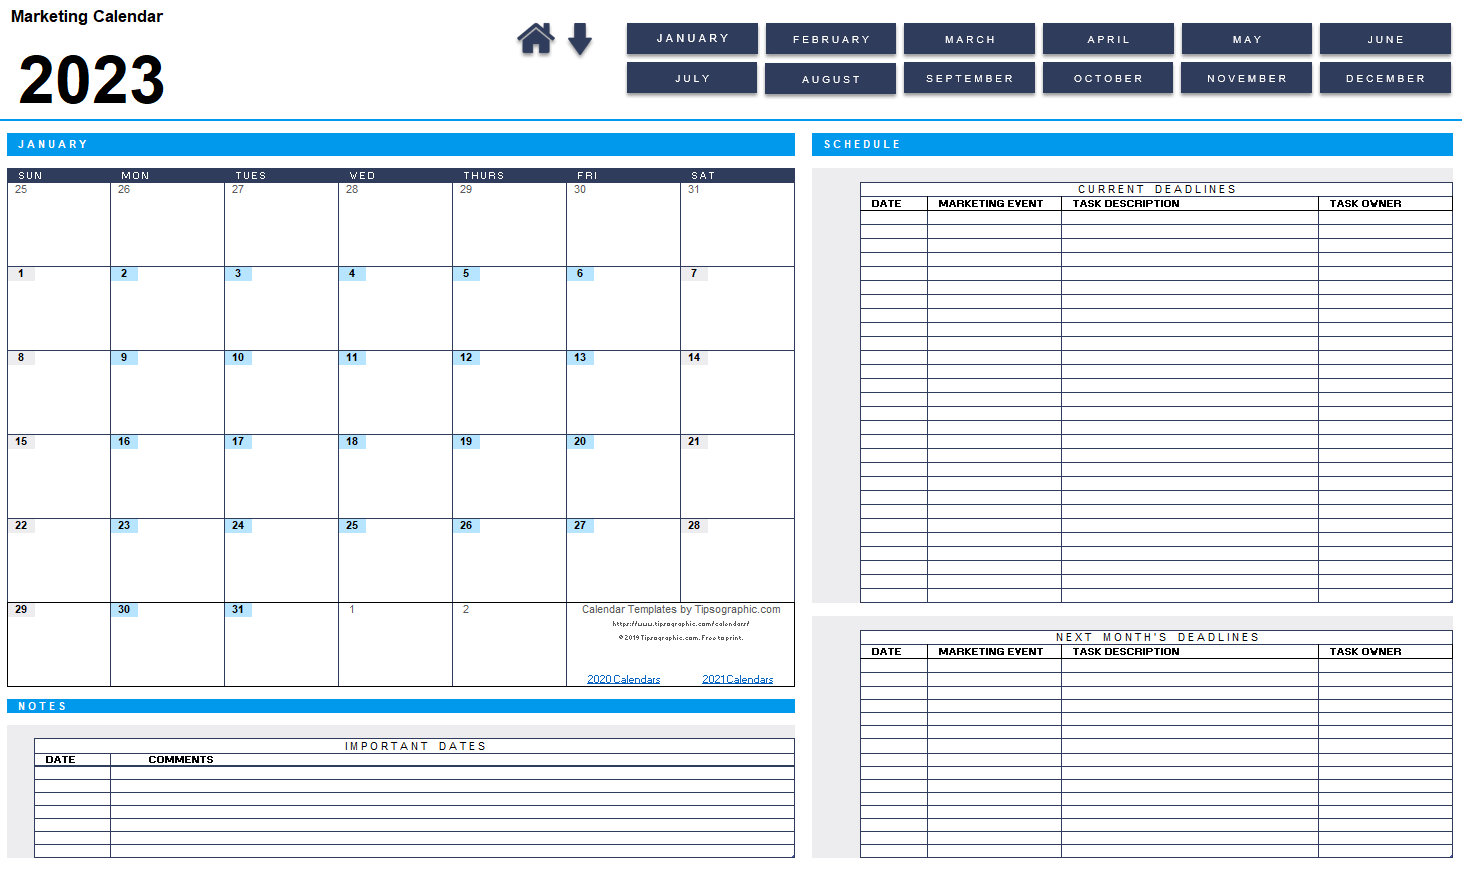 FREE DOWNLOAD Download The 2023 Marketing Calendar Blank 